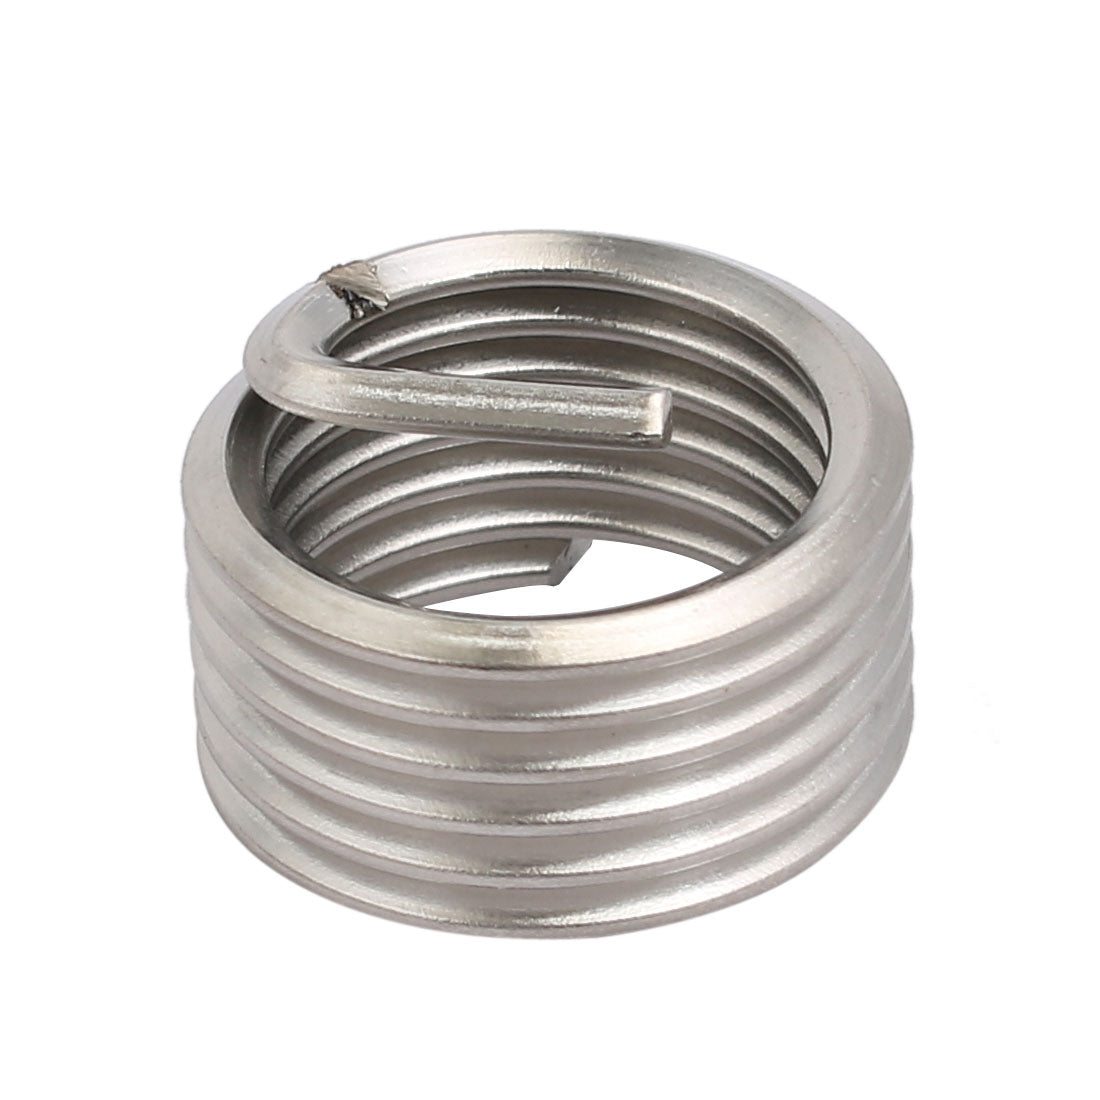 uxcell Uxcell M16x2mmx16mm 304 Stainless Steel Helical Coil Wire Thread Insert 12pcs